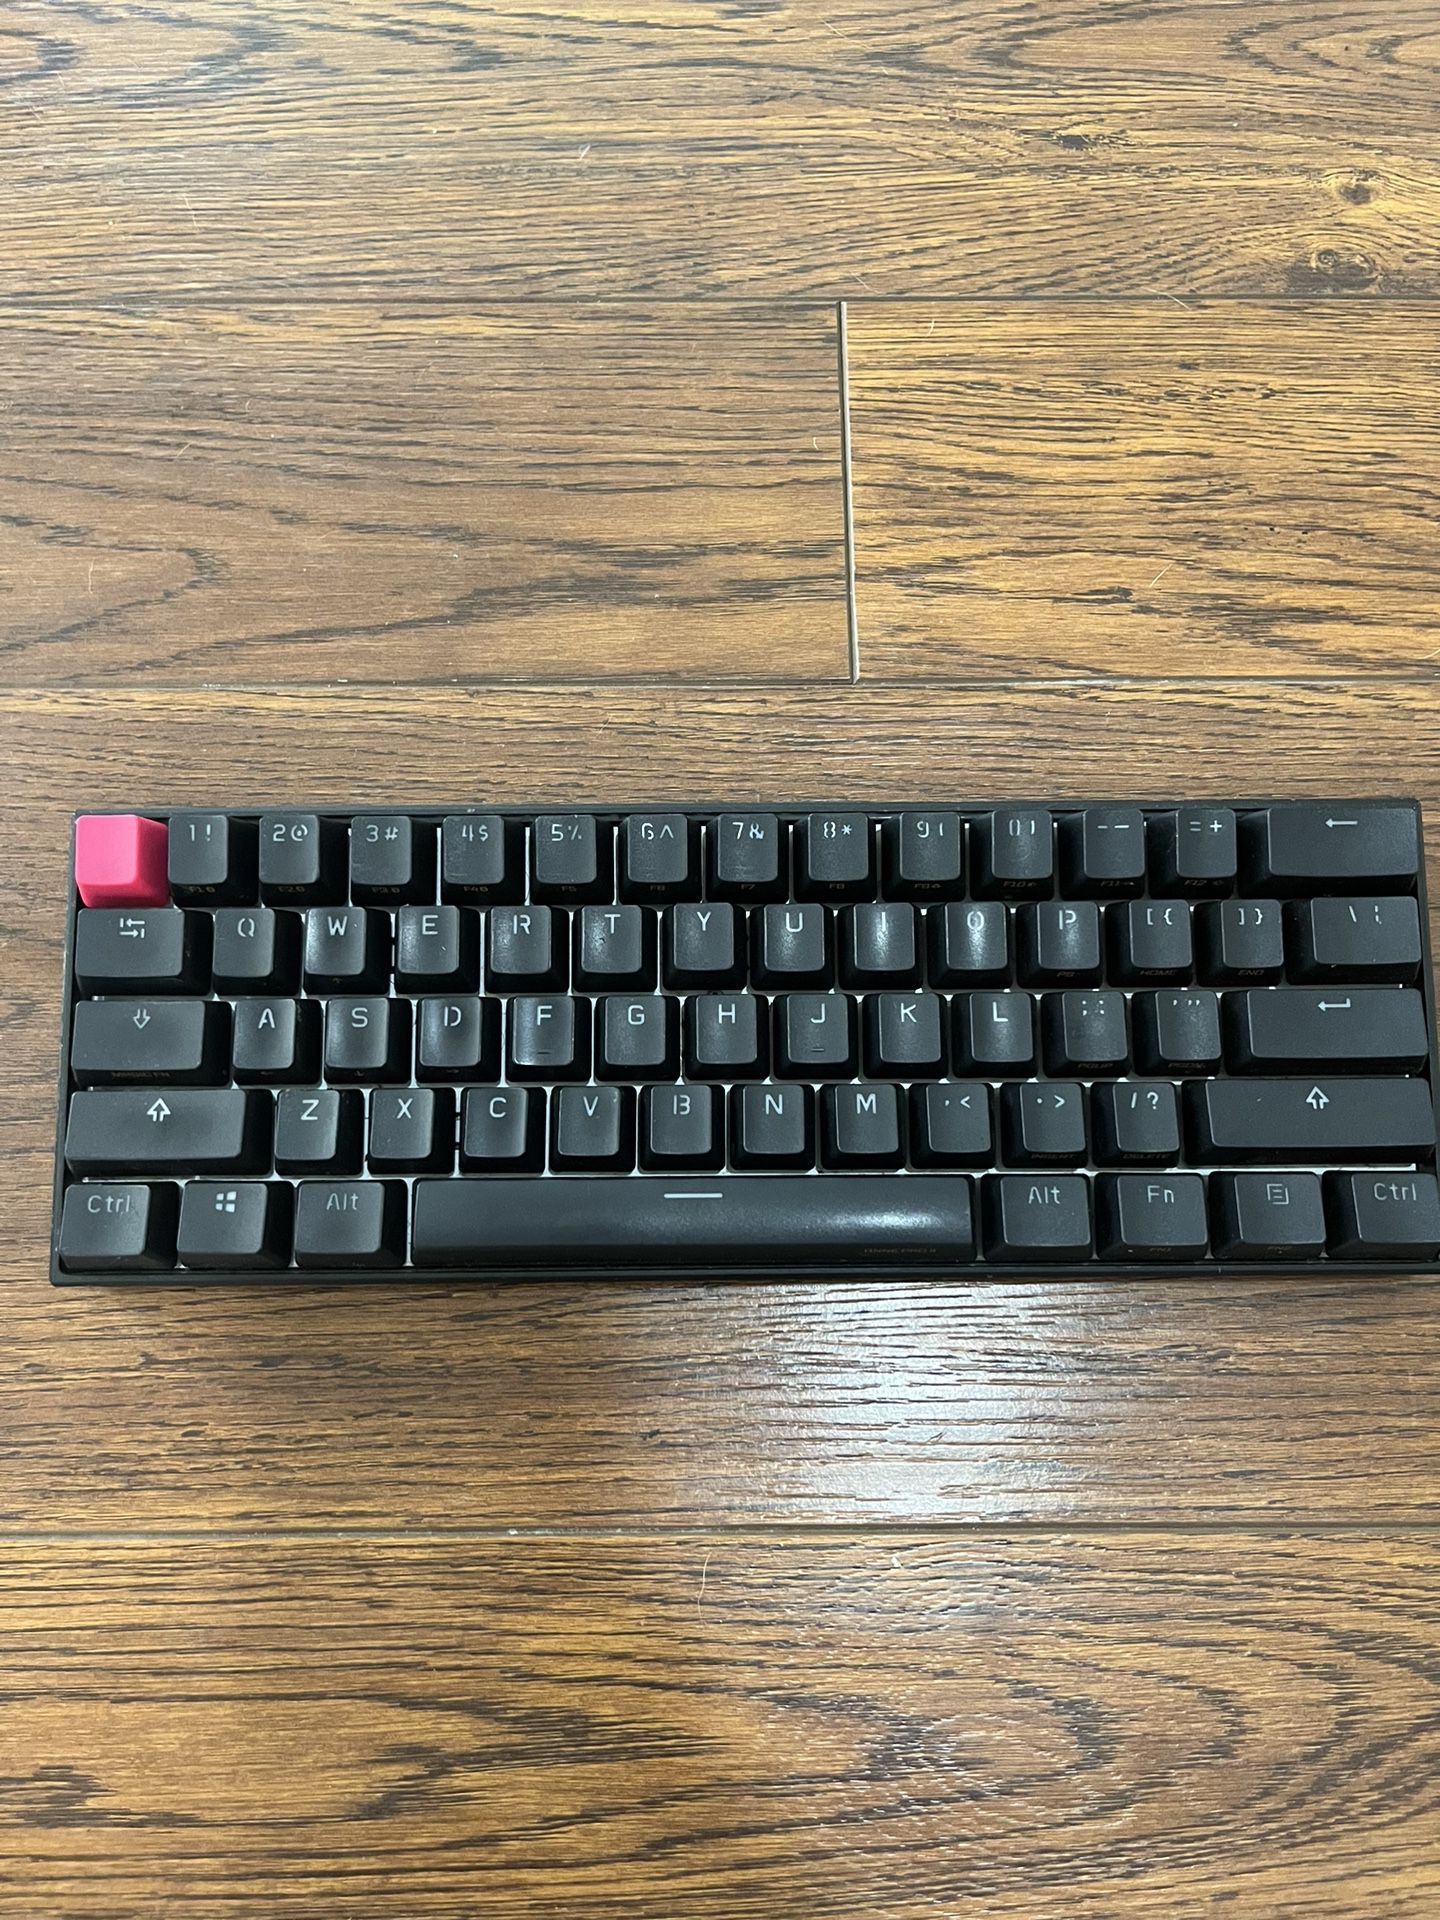 Anne Pro 2 Gaming Keyboard Red Switches 